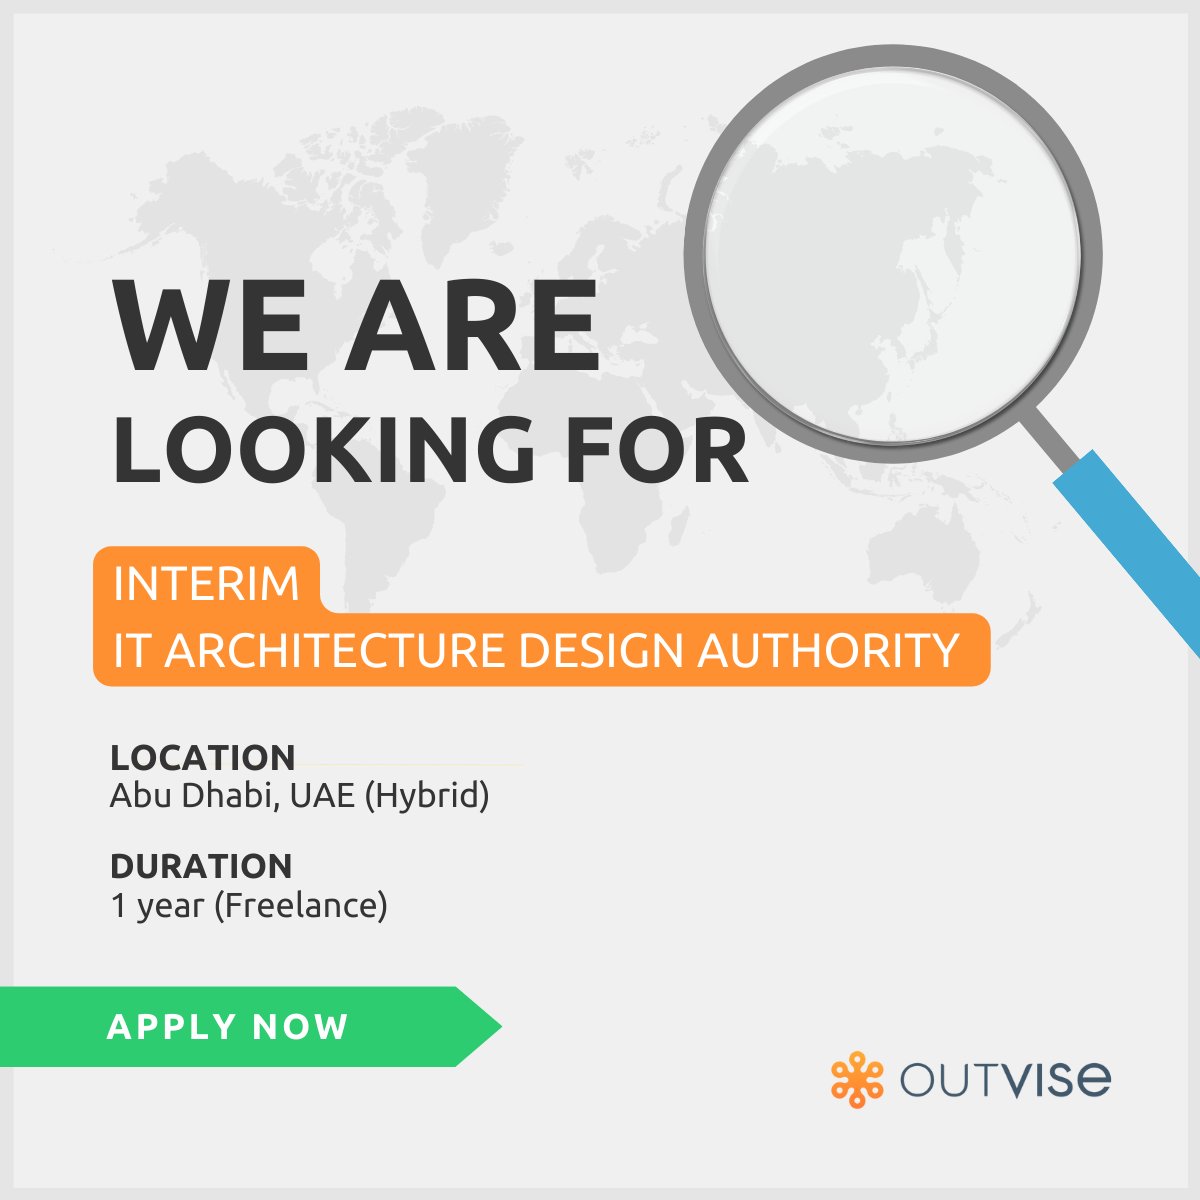 Our client is seeking an Interim IT Architecture Design Authority. 🔎 Apply here 👉 outvise.com/sl/AvHTPzlaL5 #OutviseProjects #Freelance #Hiringnow #MiddleEast